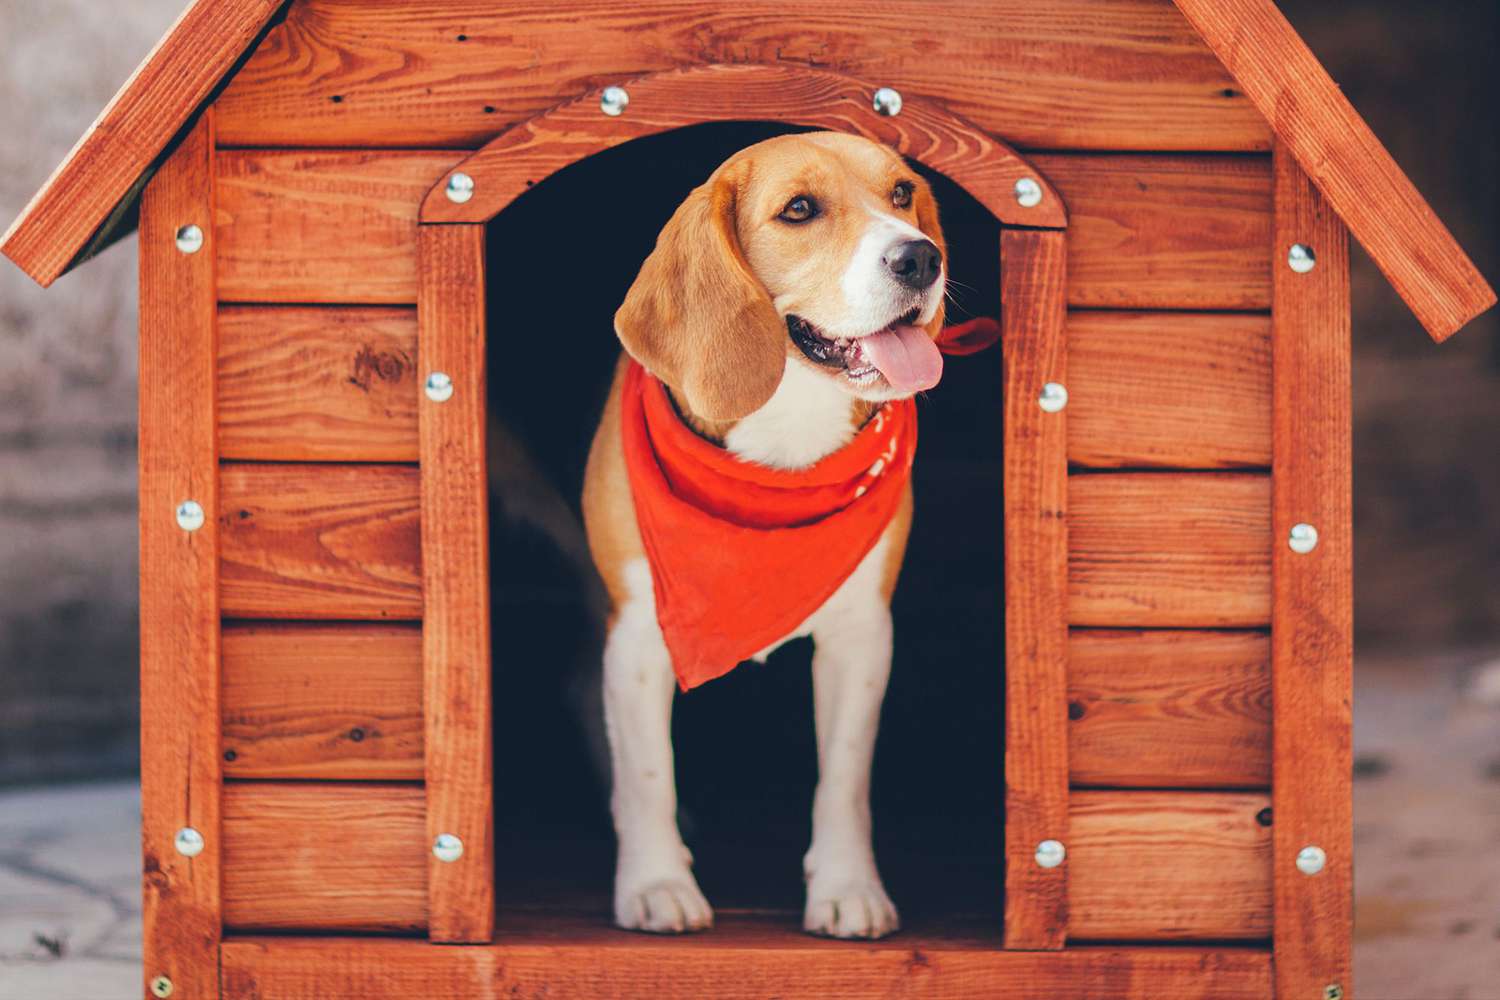 How To Insulate Igloo Dog House How to Heat a Doghouse and Keep Your Pup Warm All Winter | Daily Paws